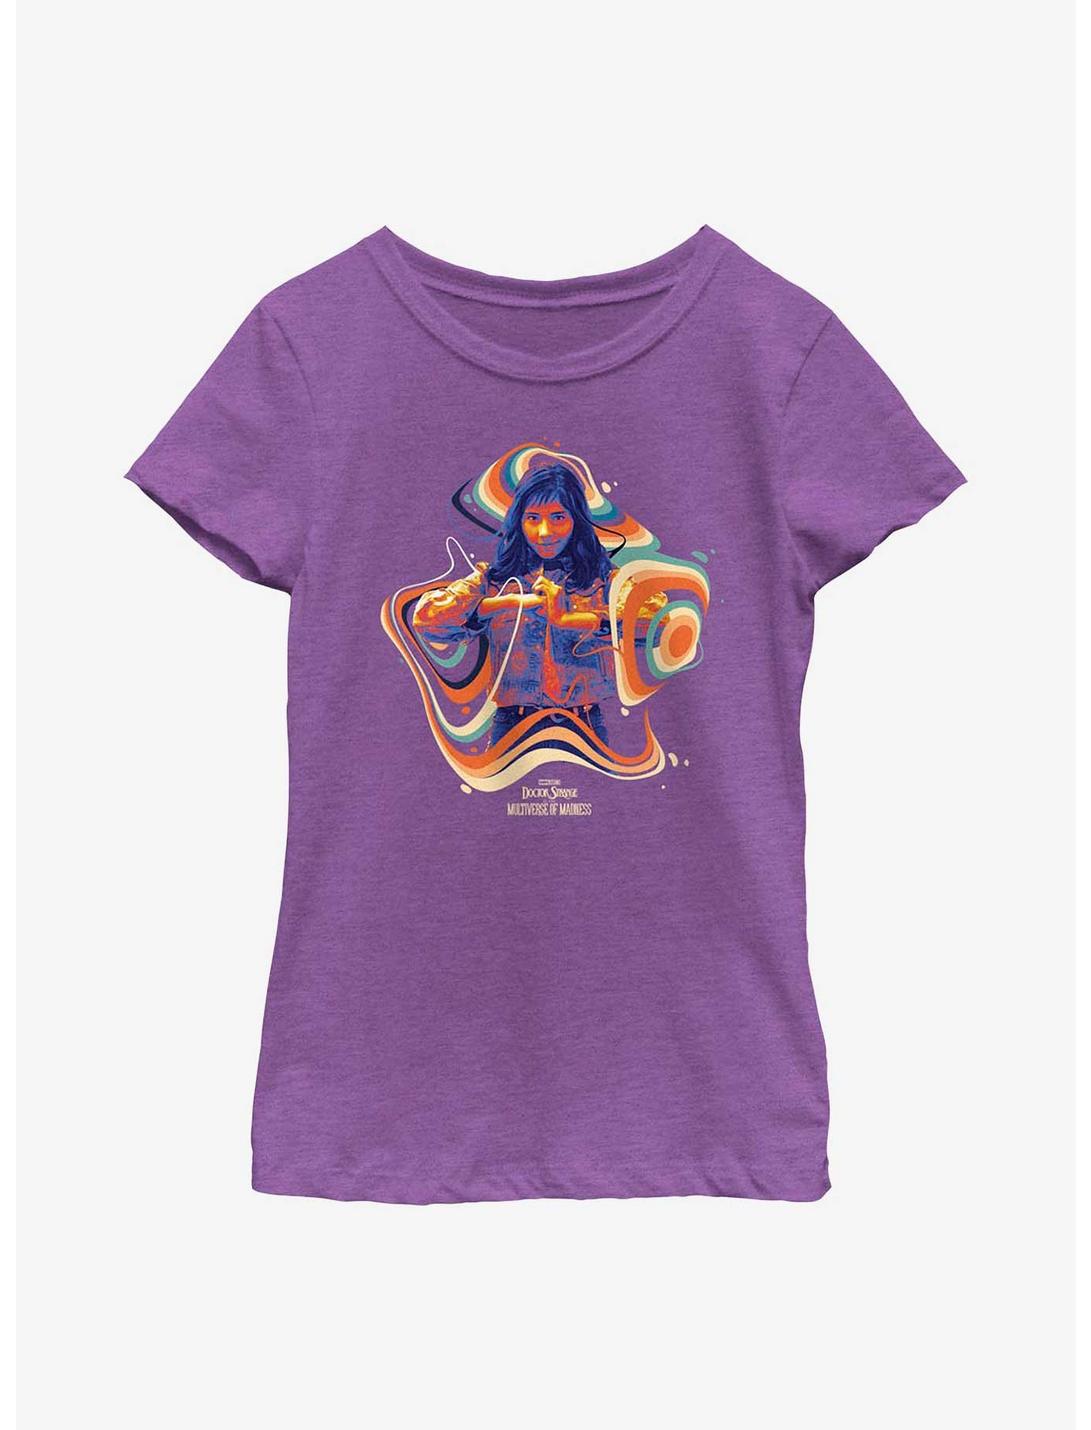 Marvel Doctor Strange Multiverse Of Madness Chavez Groovy Youth Girls T-Shirt, PURPLE BERRY, hi-res